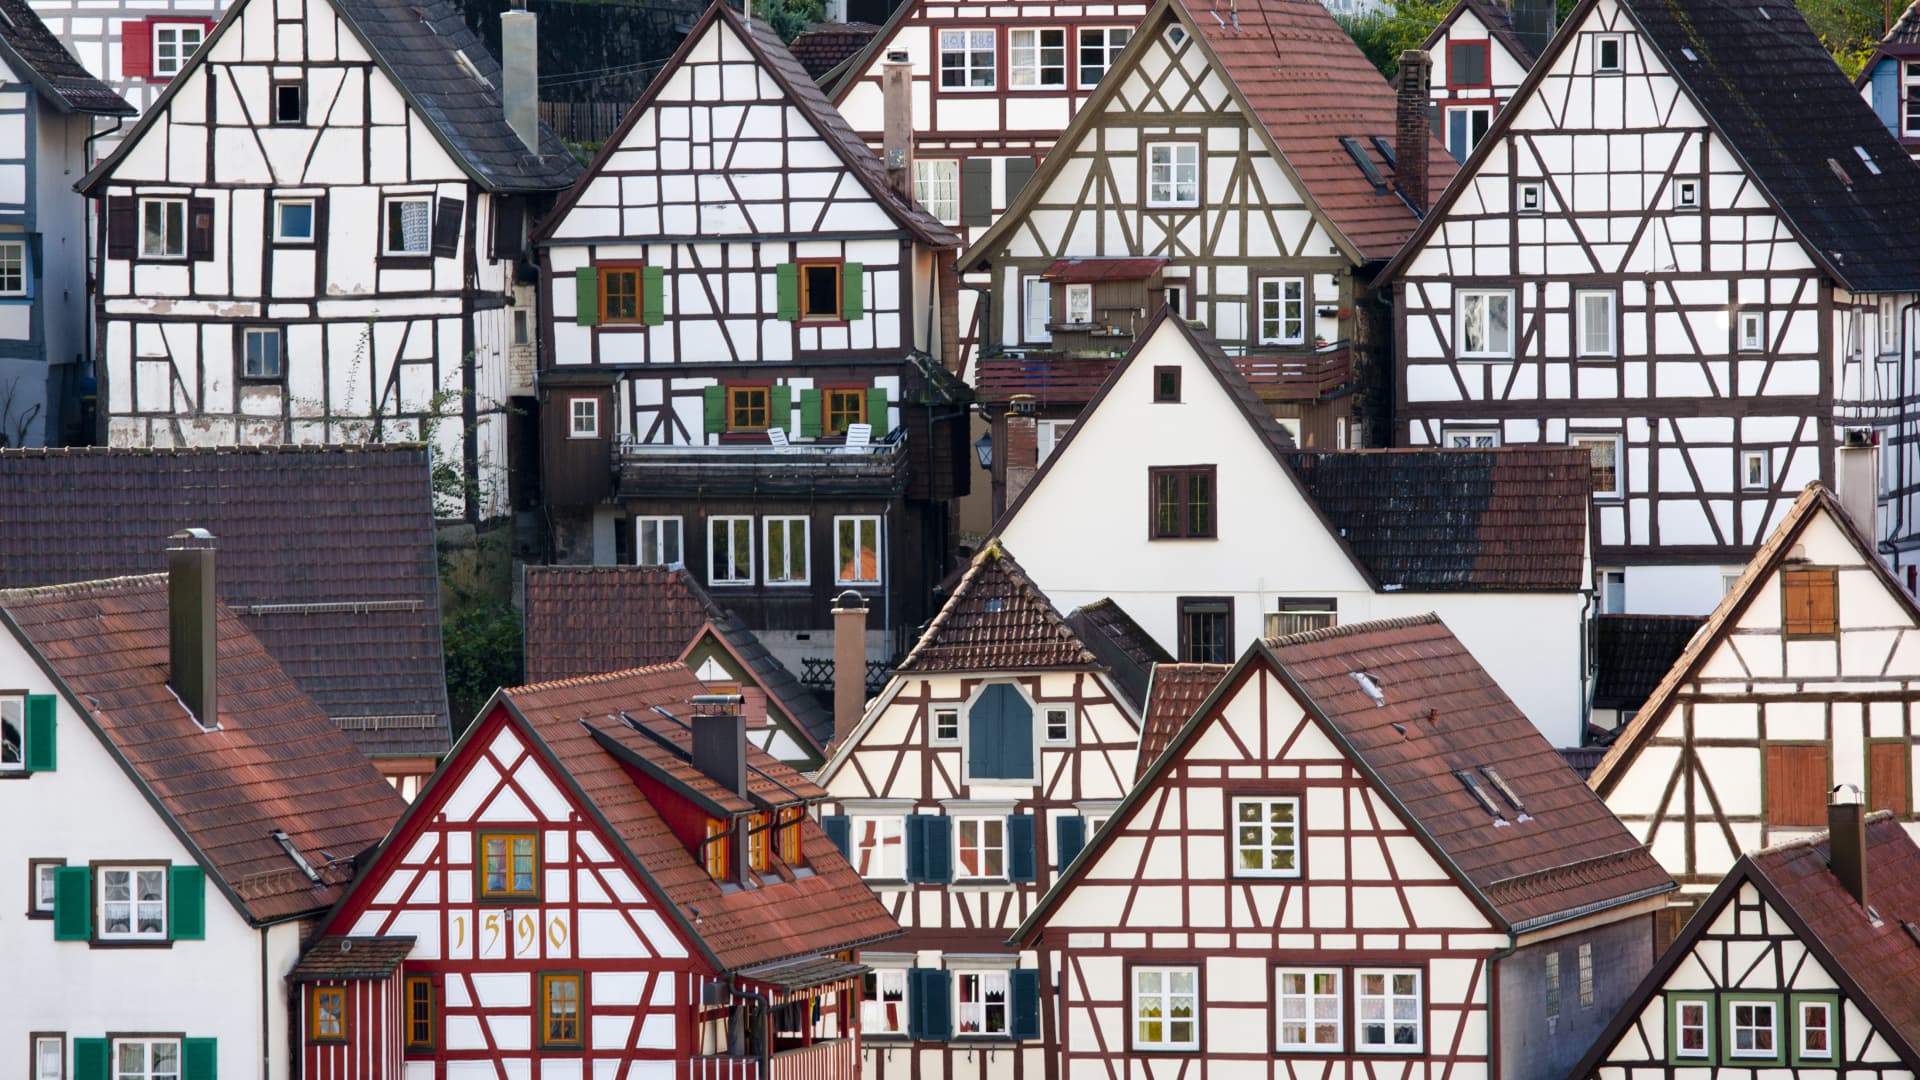 Germany's housing market is facing a serious downturn in prices, analysts say